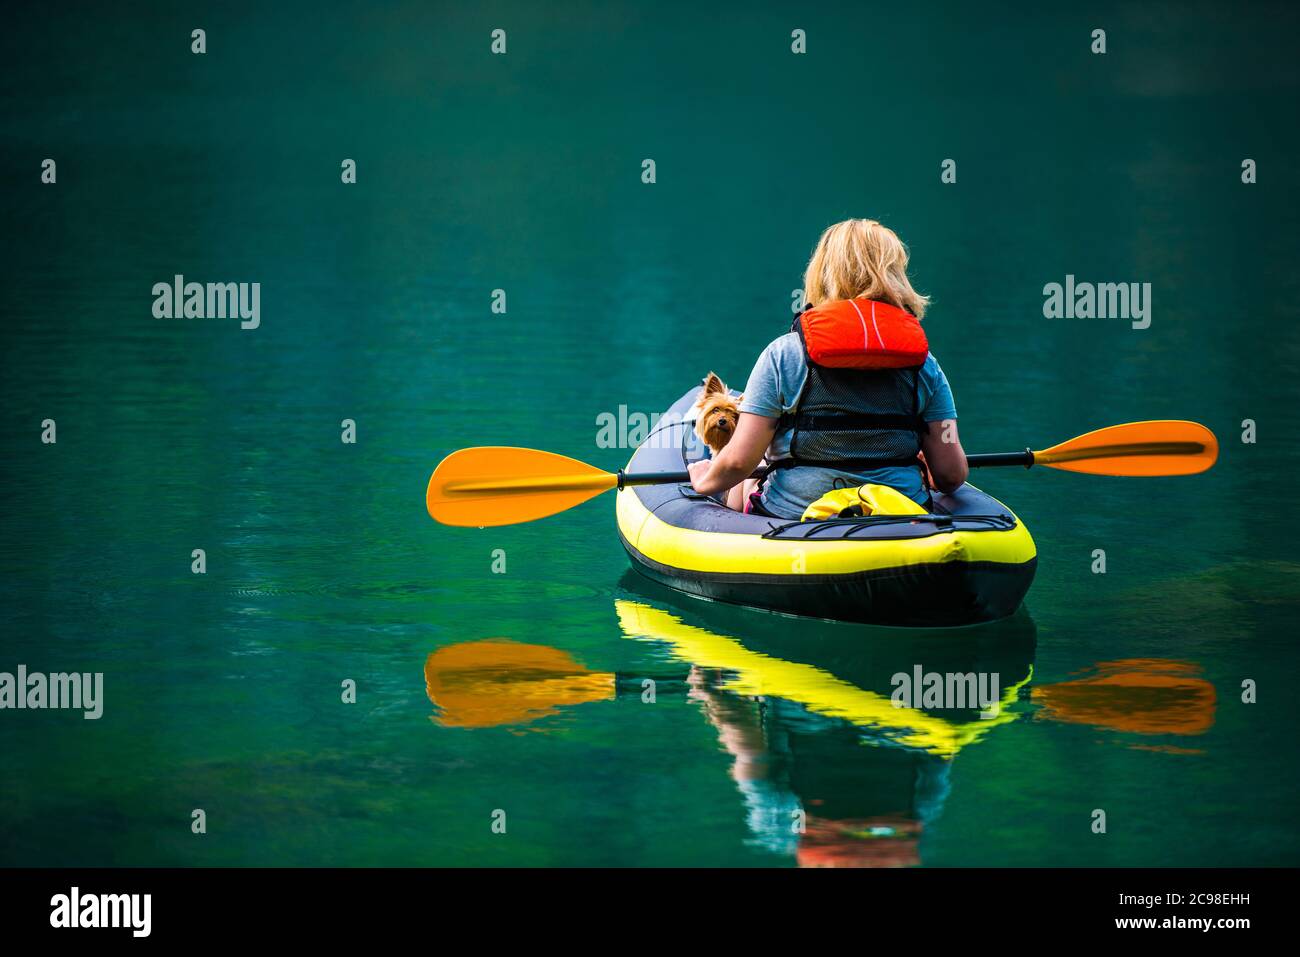 Caucasian Woman Kayaking with Her Australian Silky Terrier Dog During Summer Afternoon. Scenic Turquoise Lake. Stock Photo